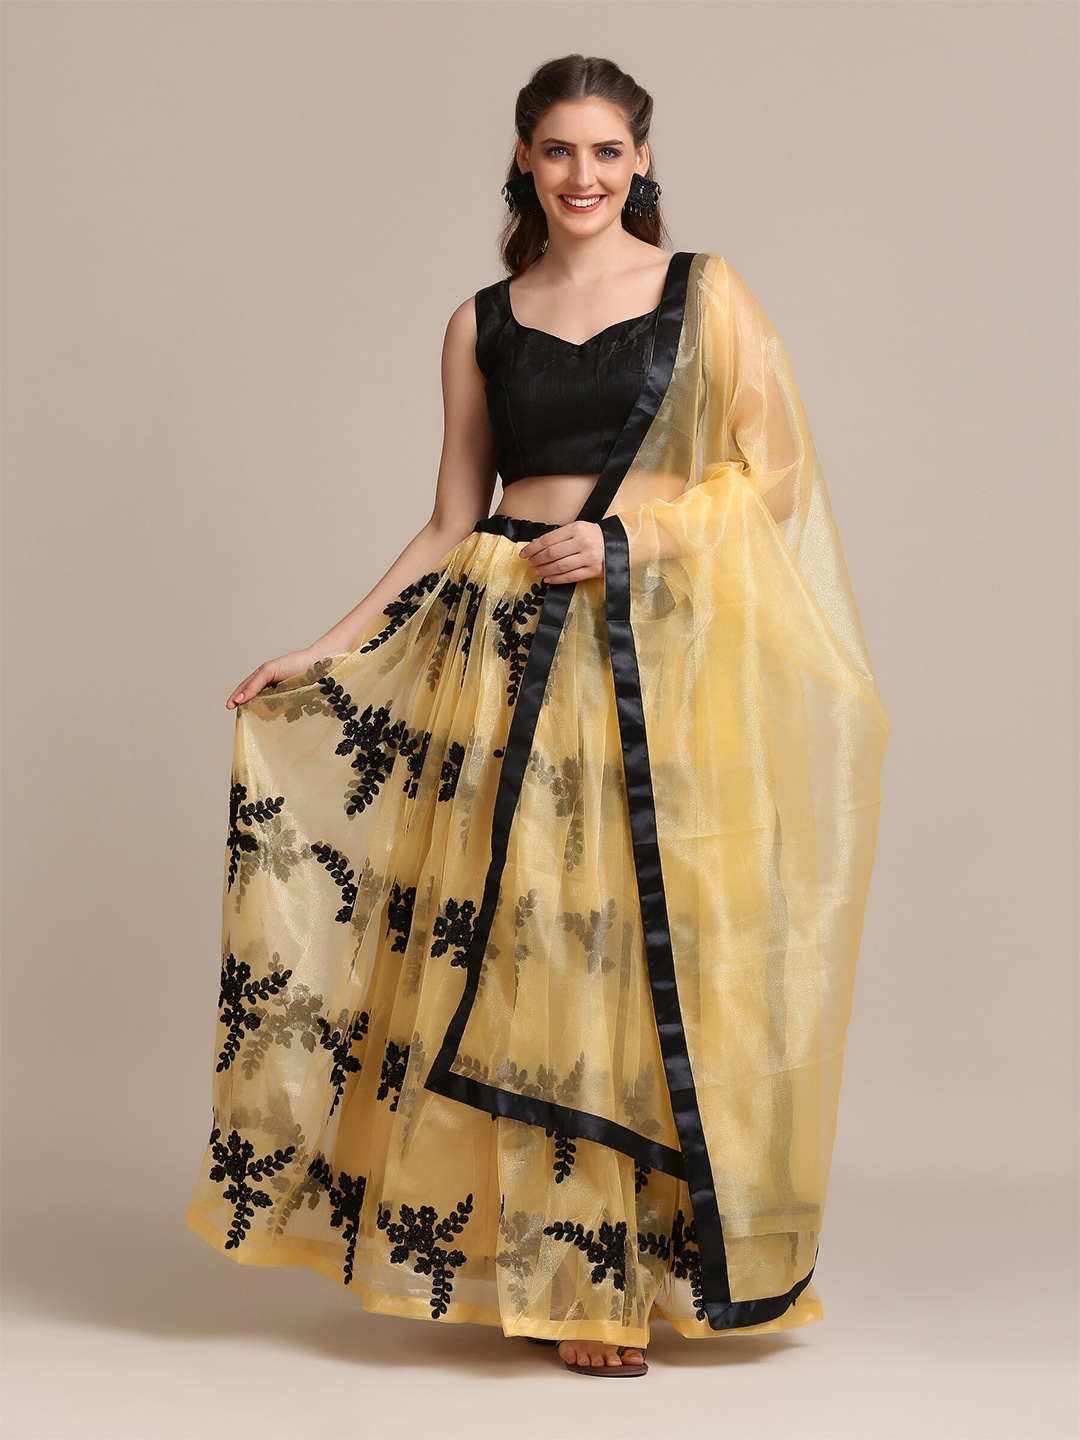 Discover more than 80 black and golden lehenga designs - POPPY